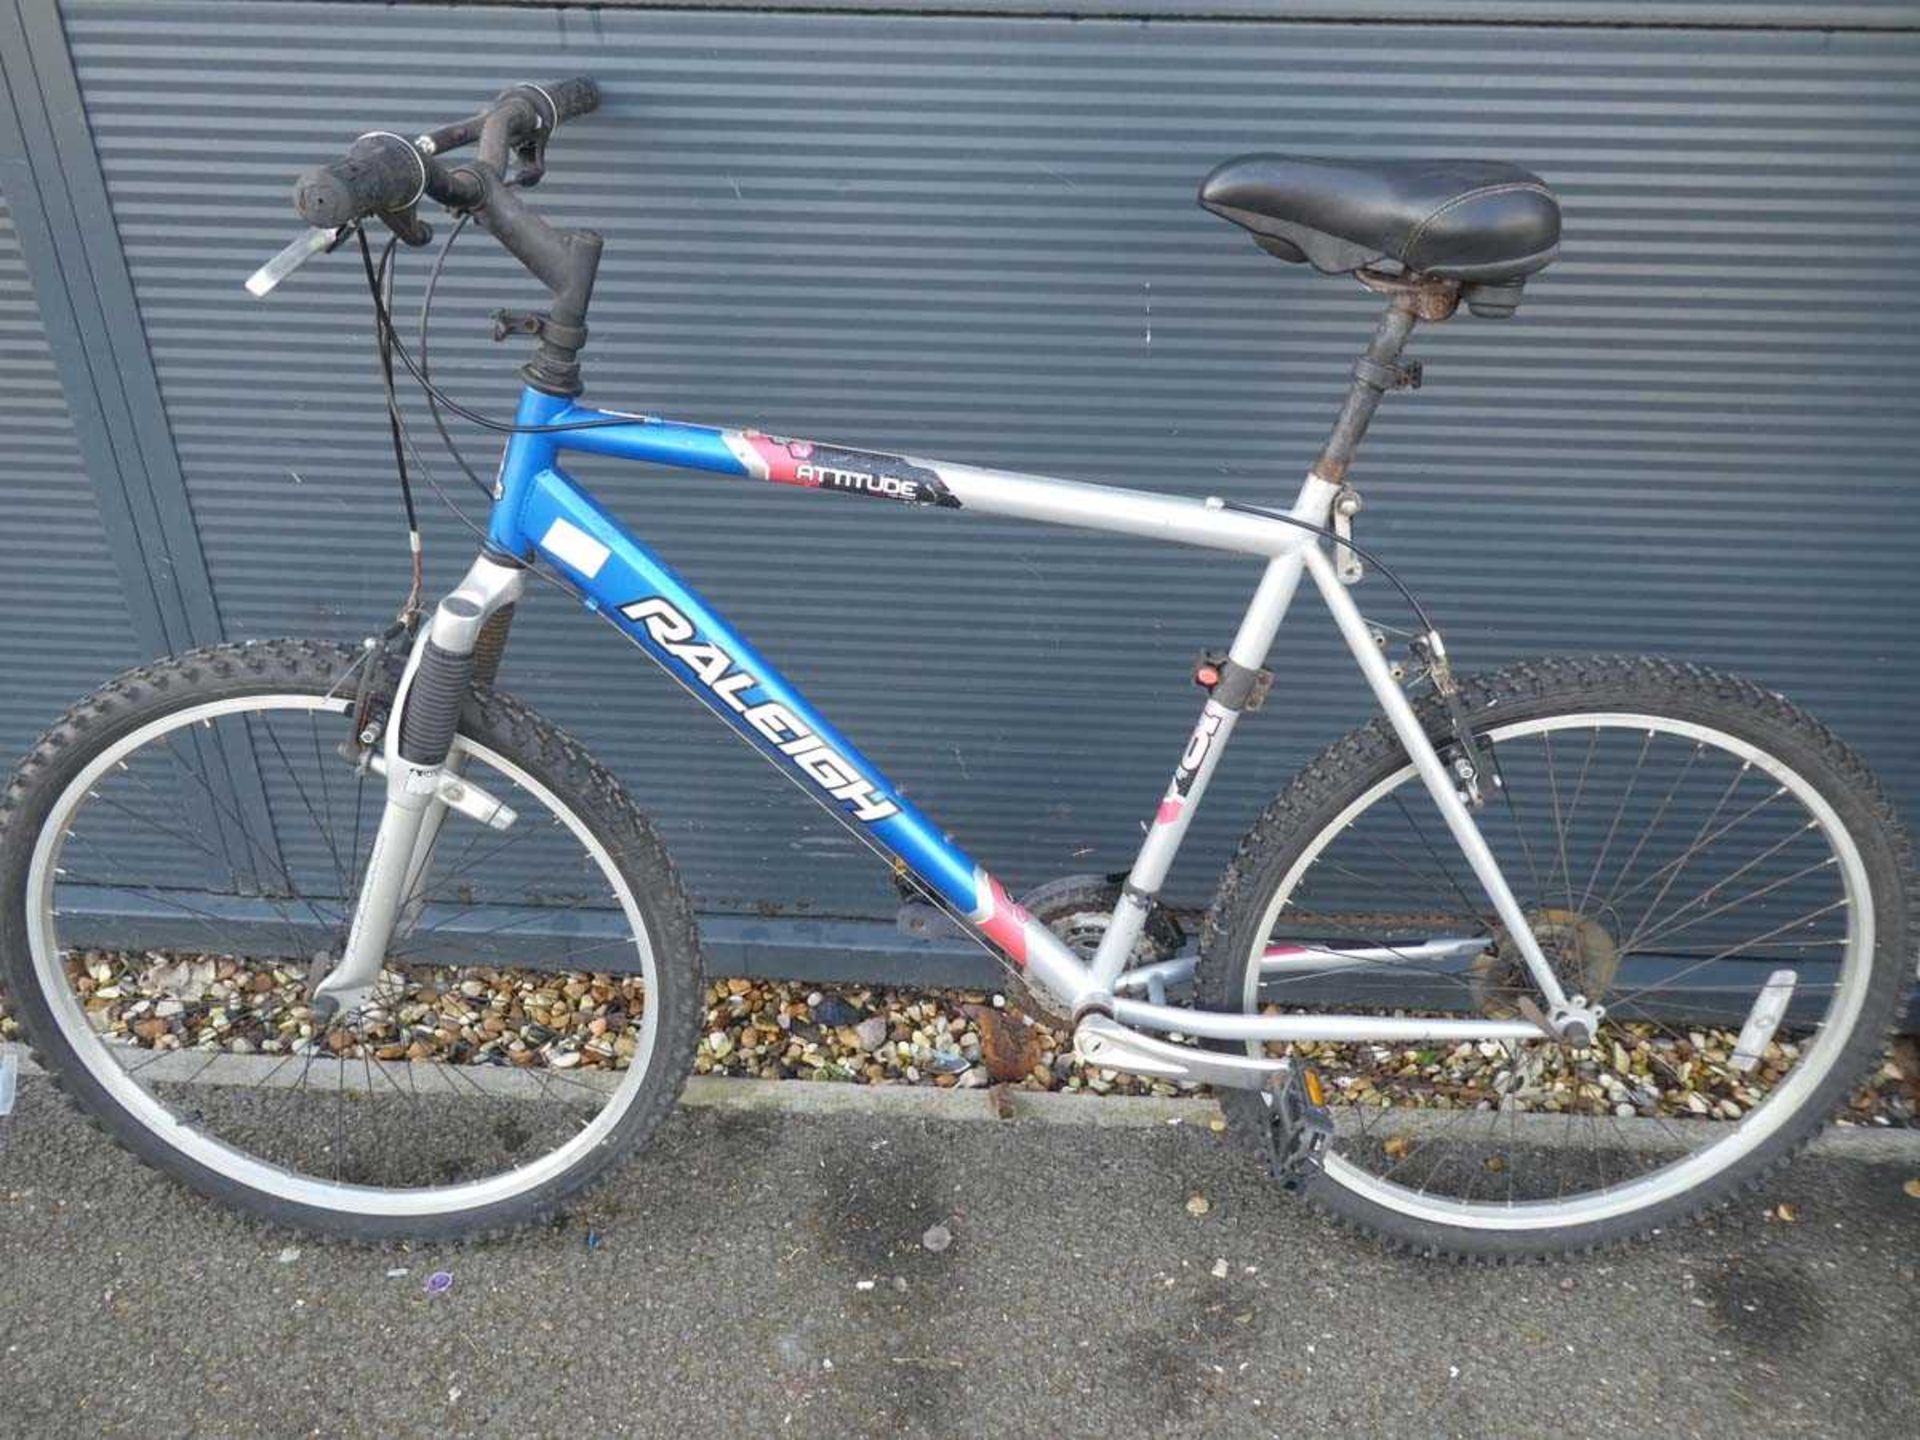 Raleigh blue and silver gents mountain bike